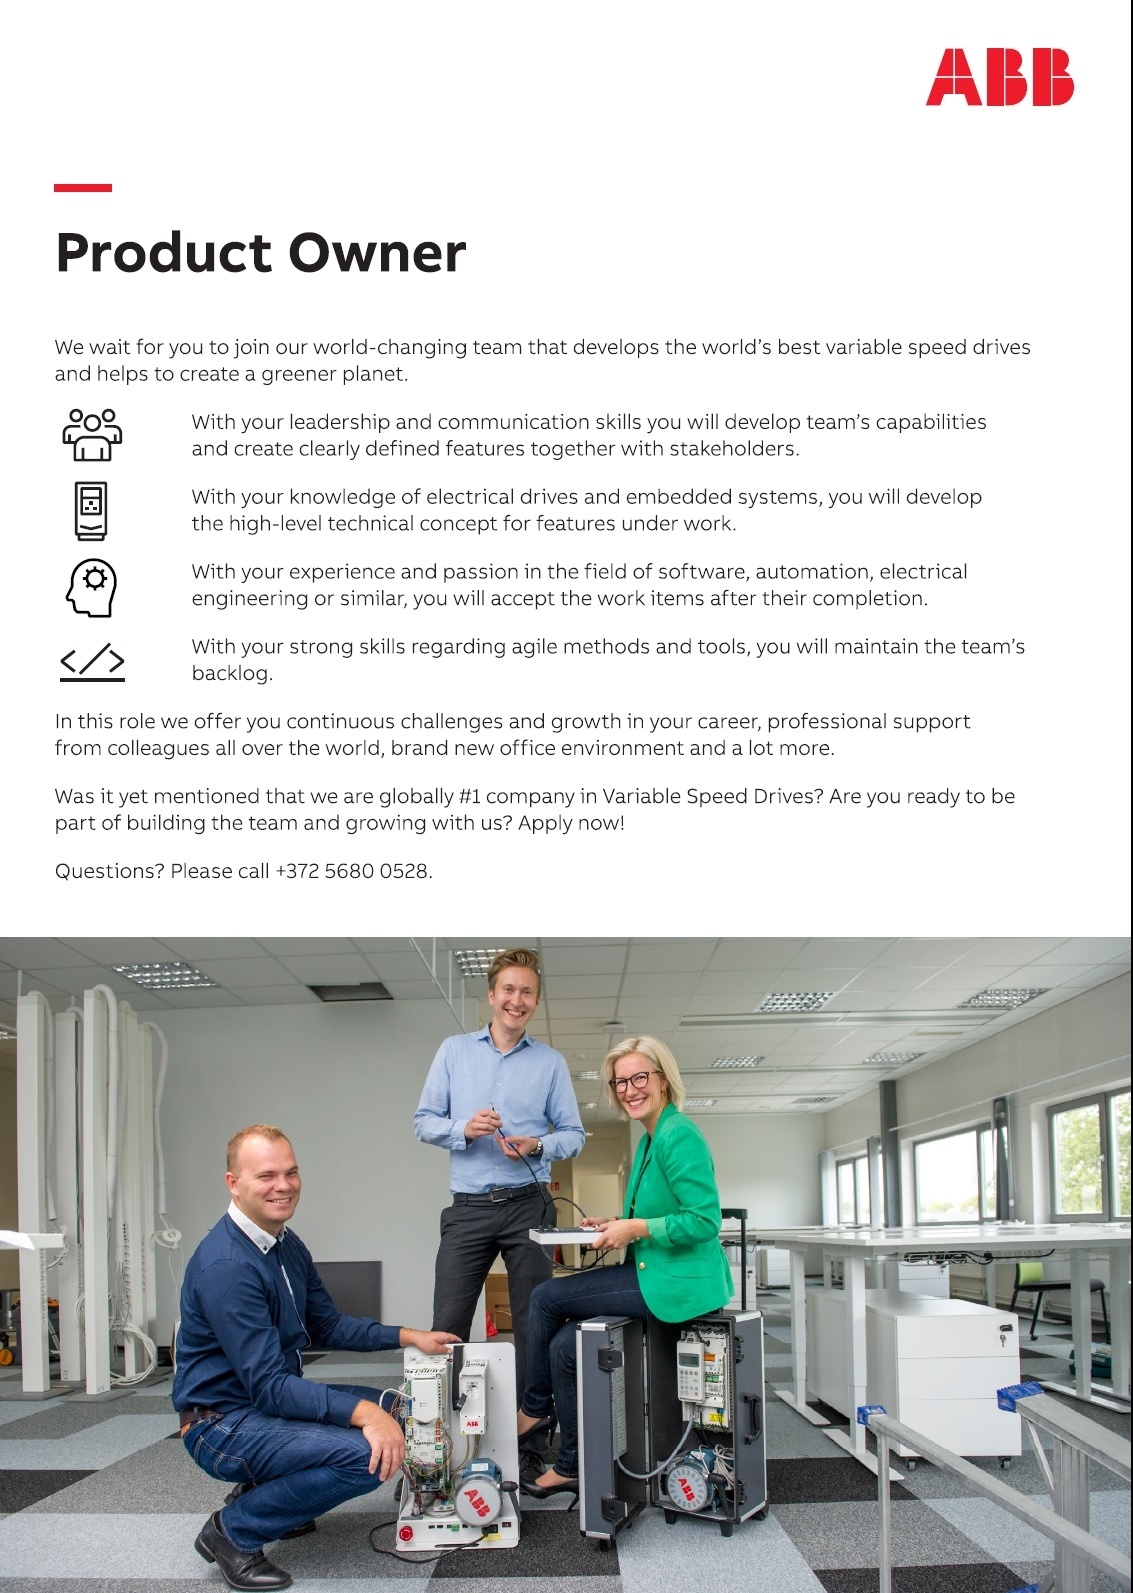 ABB AS Product Owner